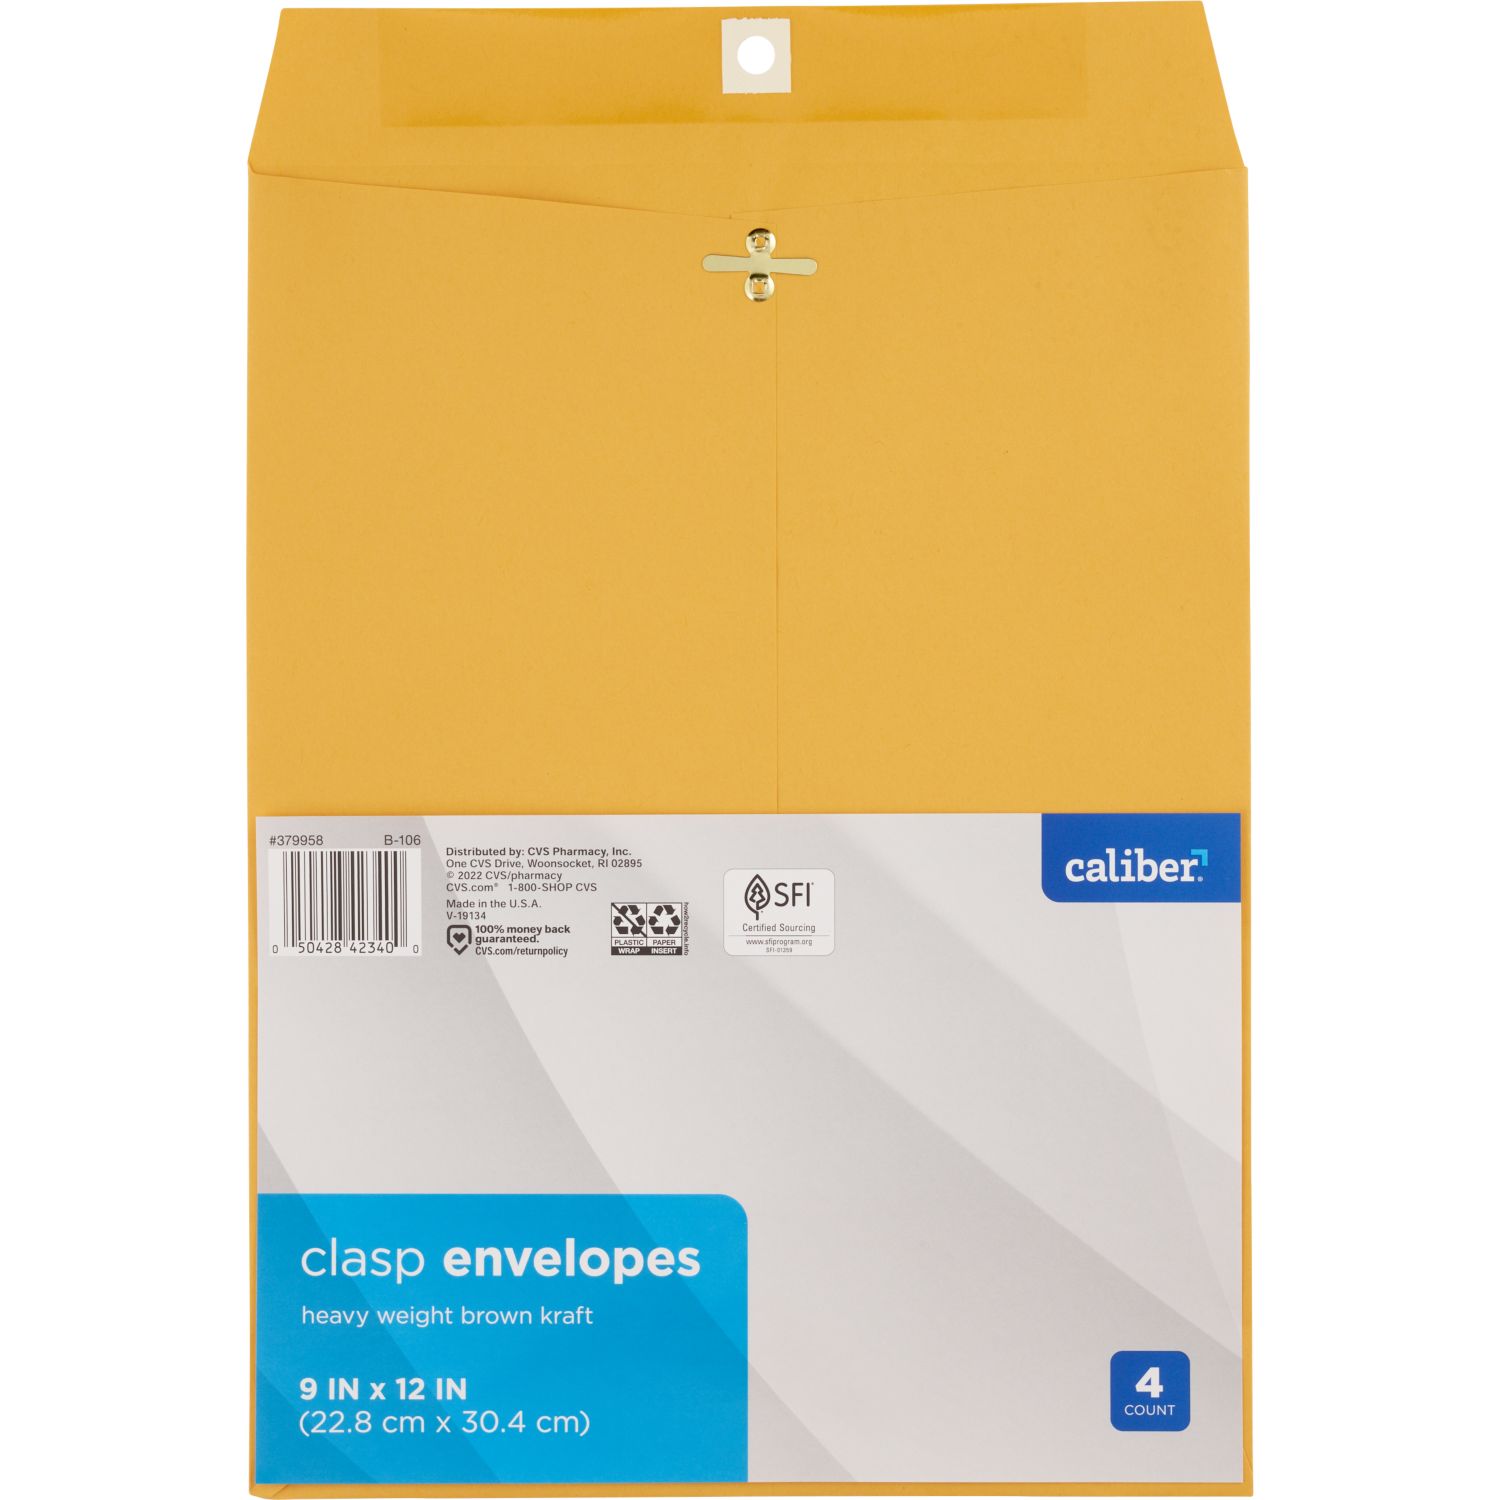 Caliber Clasp Envelopes, 9 in. x 12 in., 4 CT